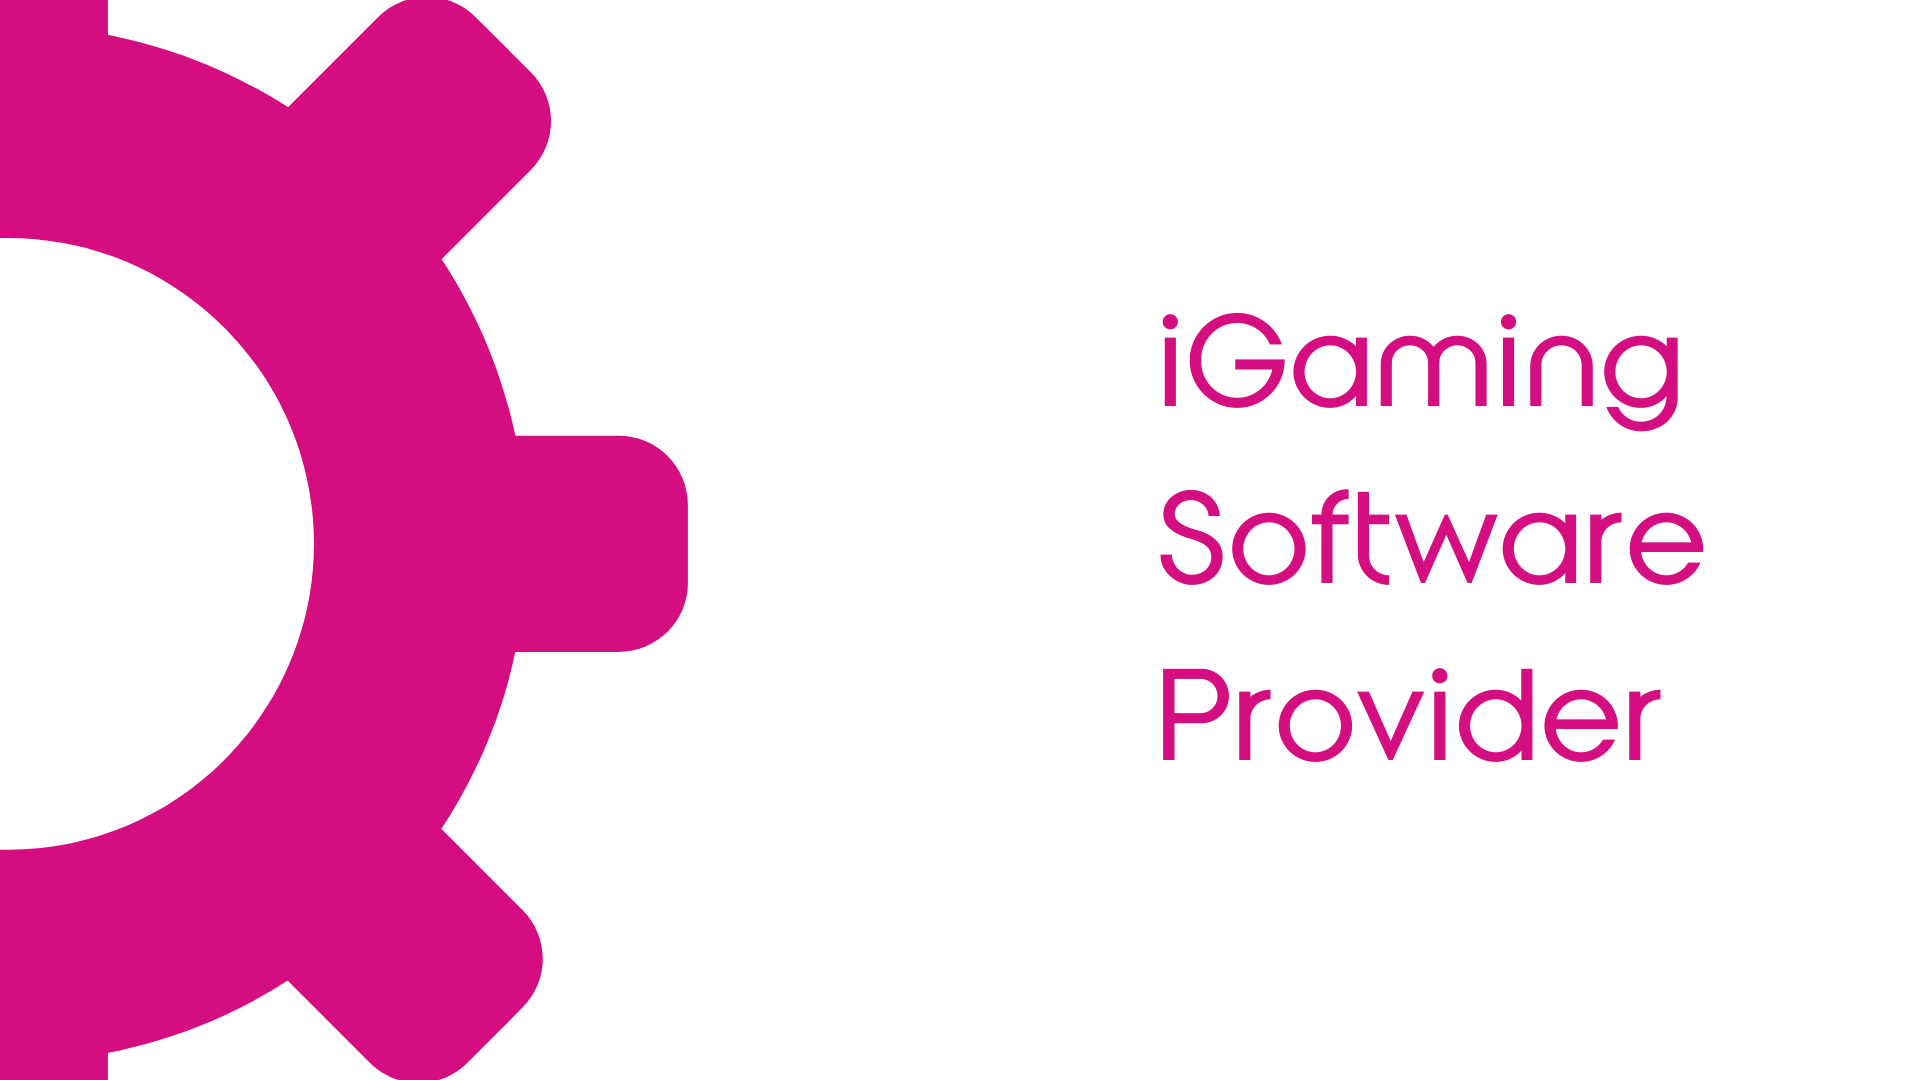 iGaming Software Provider